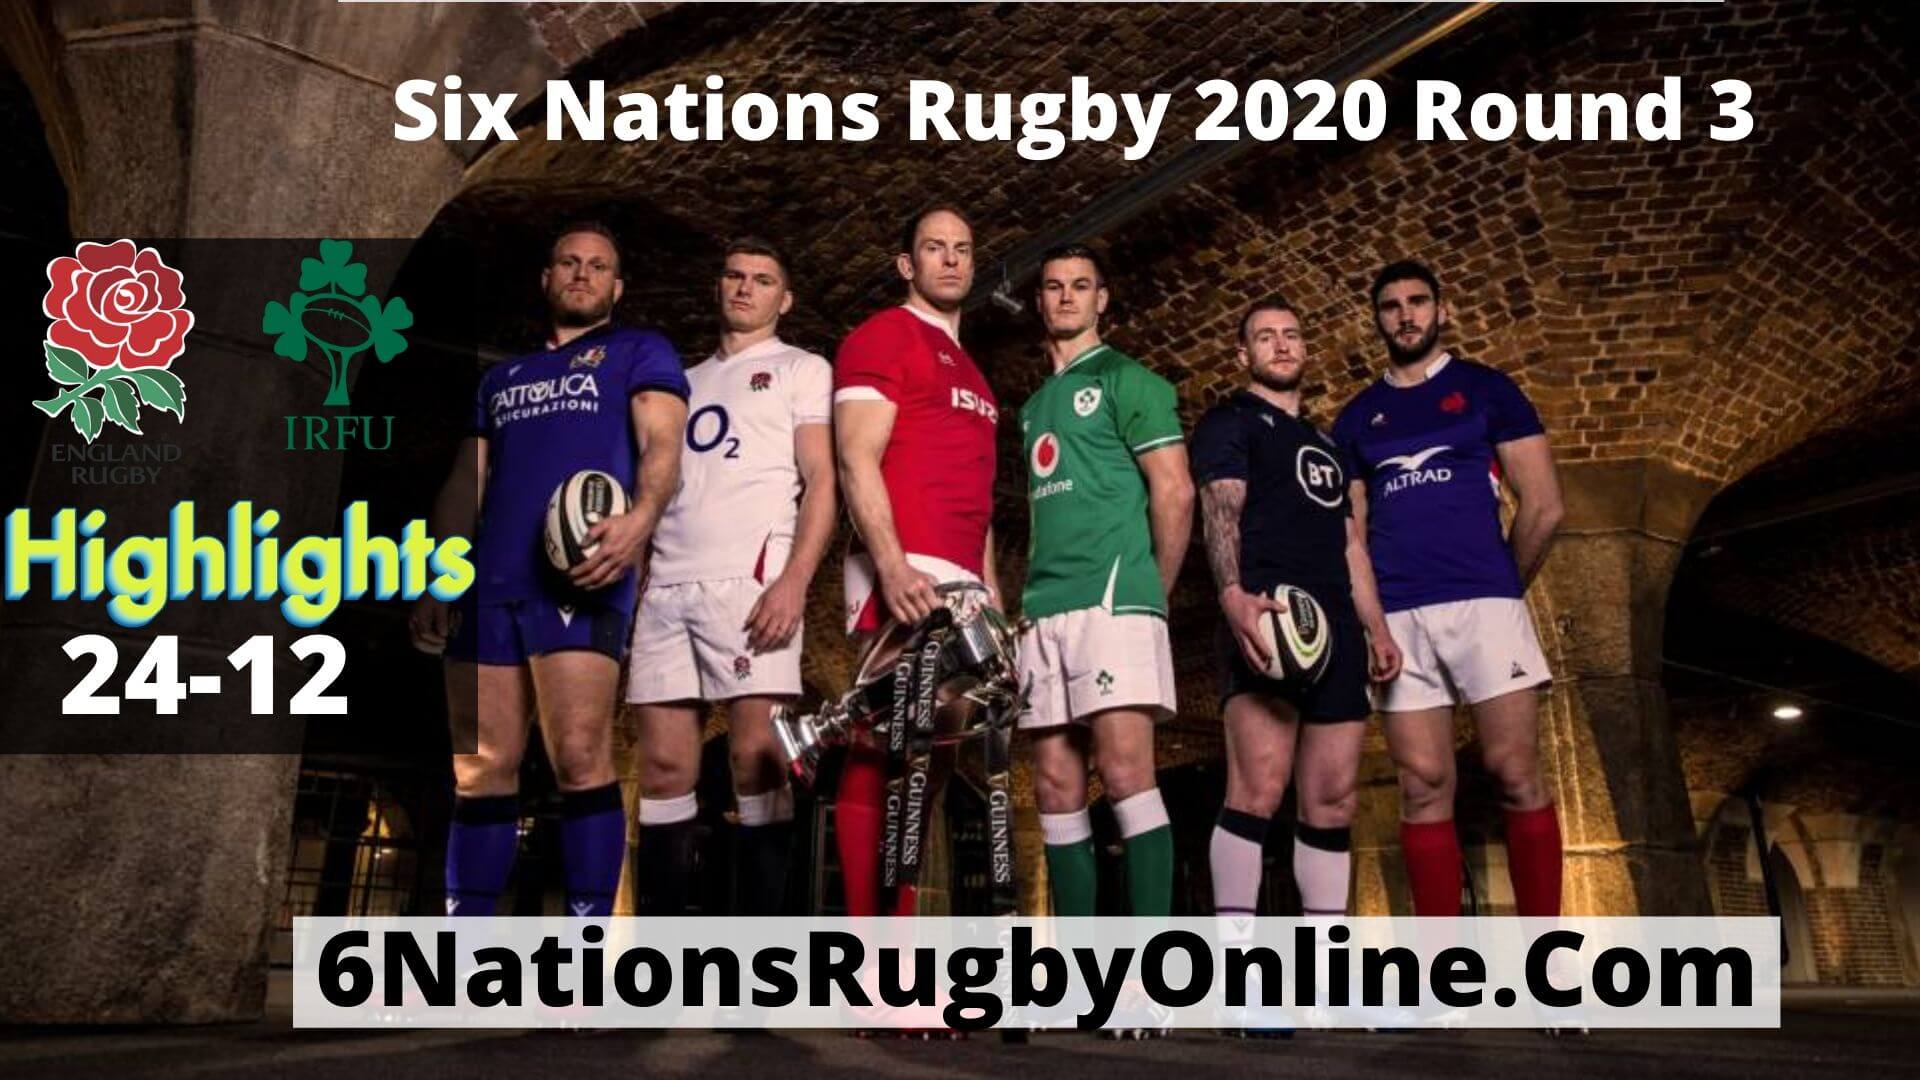 England Vs Ireland Highlights 2020 Rd 3 Six Nations Rugby